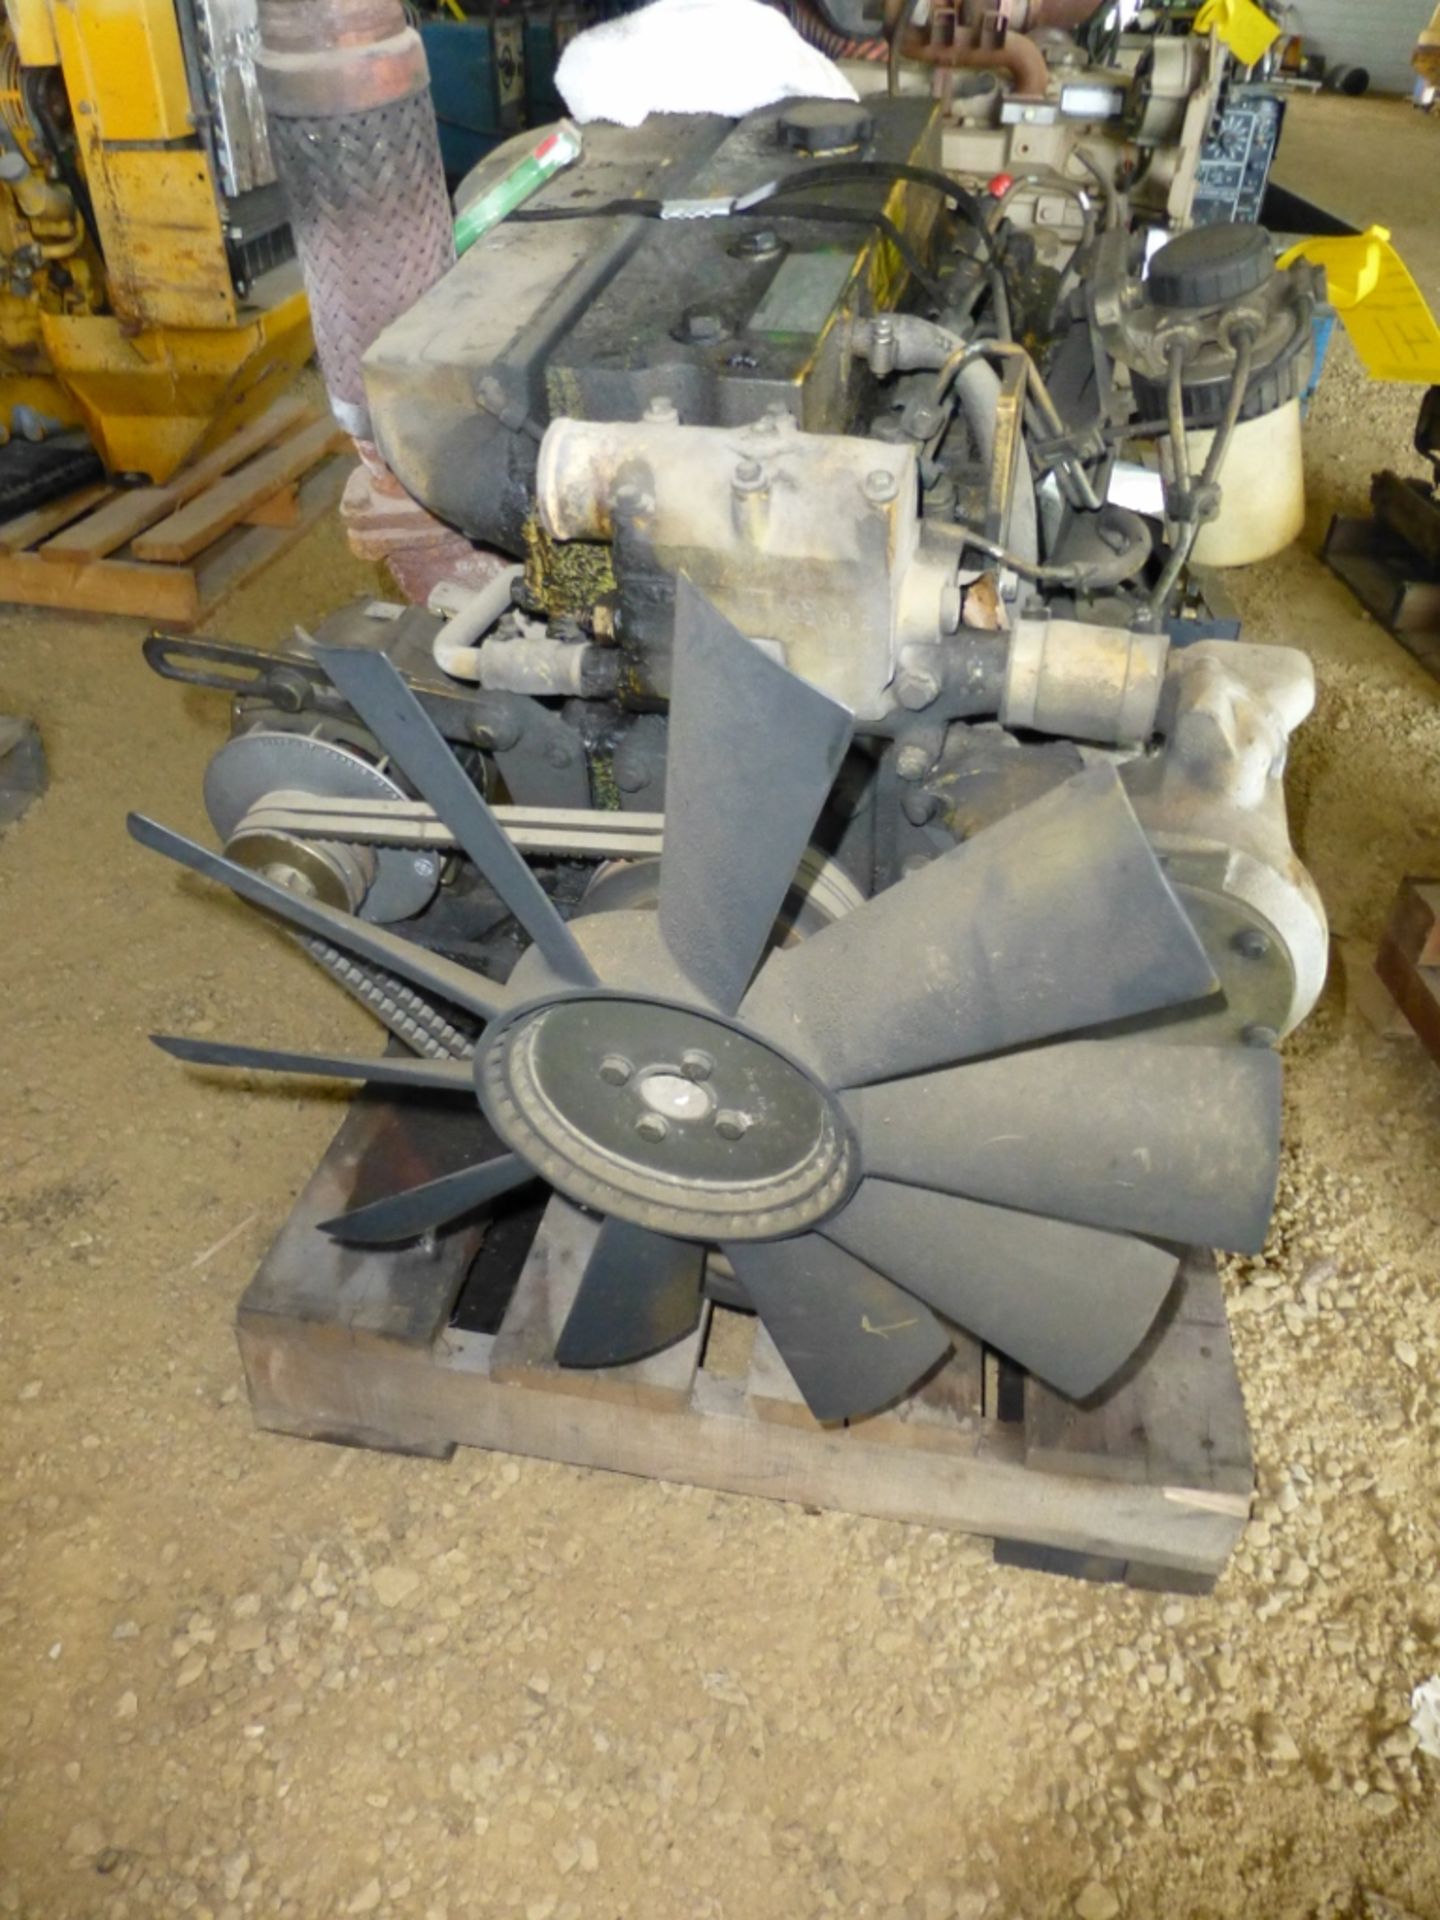 Caterpillar 106Hp, 4 cyl diesel engine. SE: 5hk08070, unknown running condition - Image 3 of 9